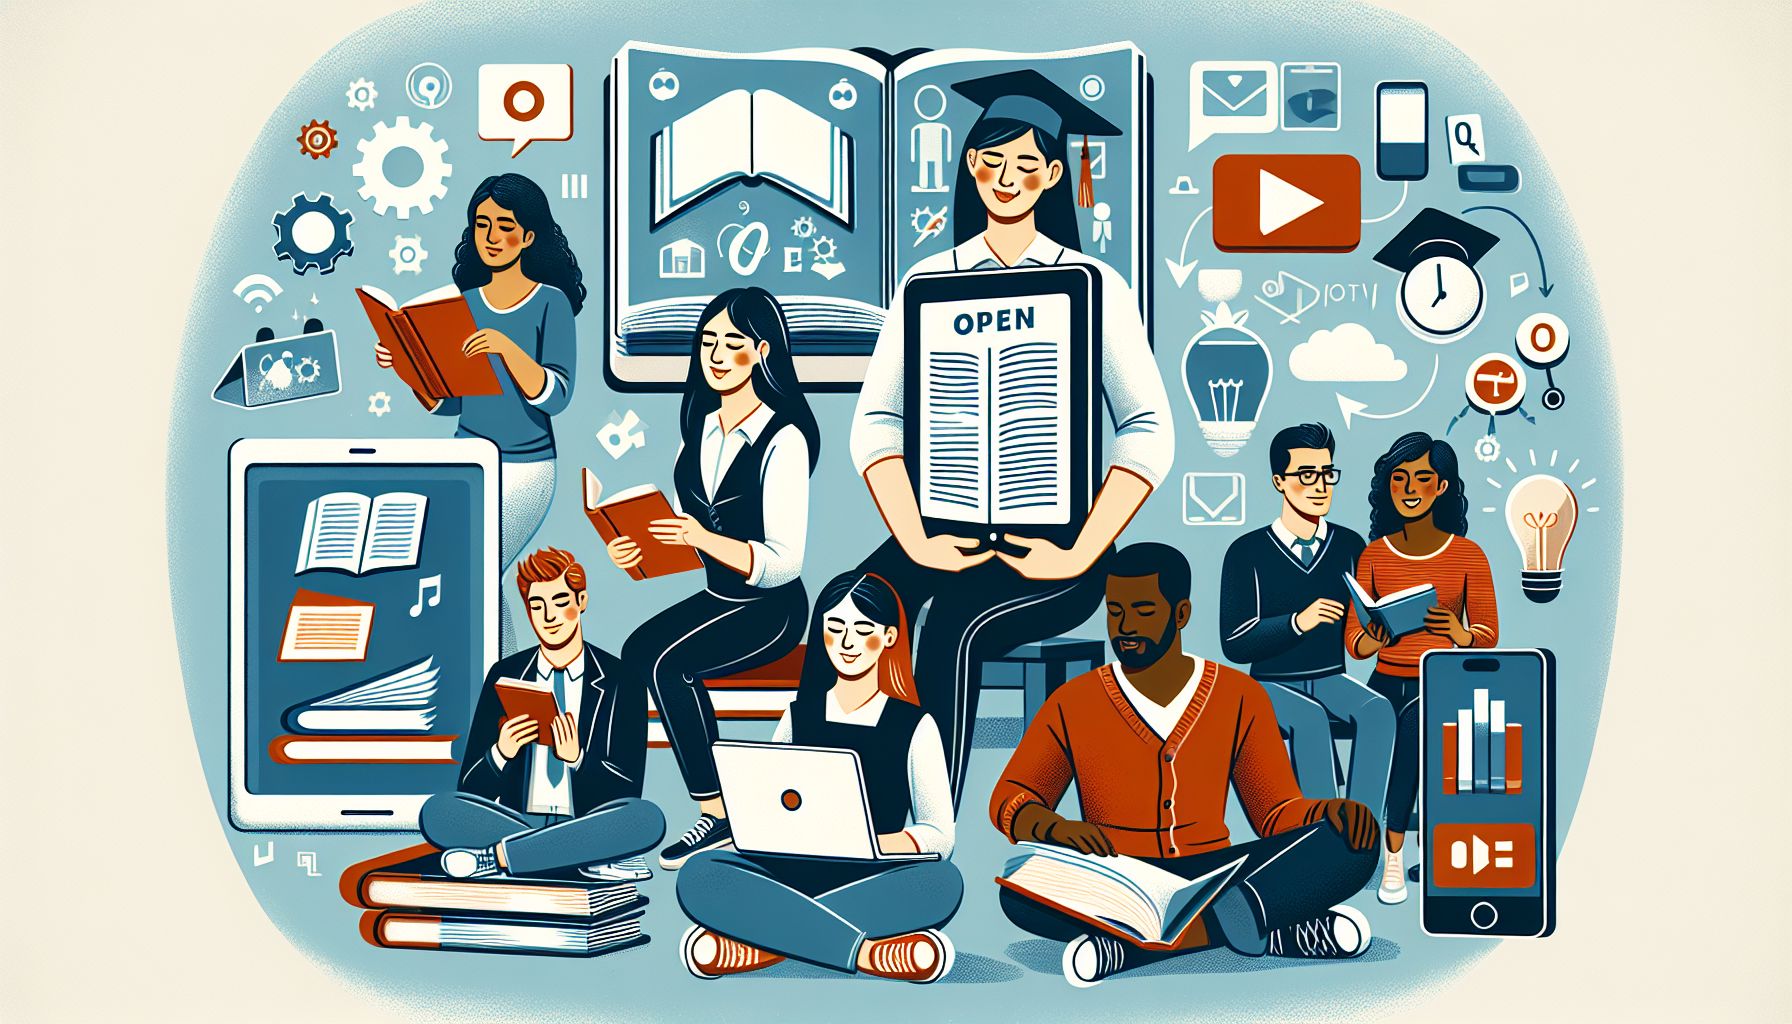 Open Educational Resources for University Students: Accessible and Affordable Learning Tools